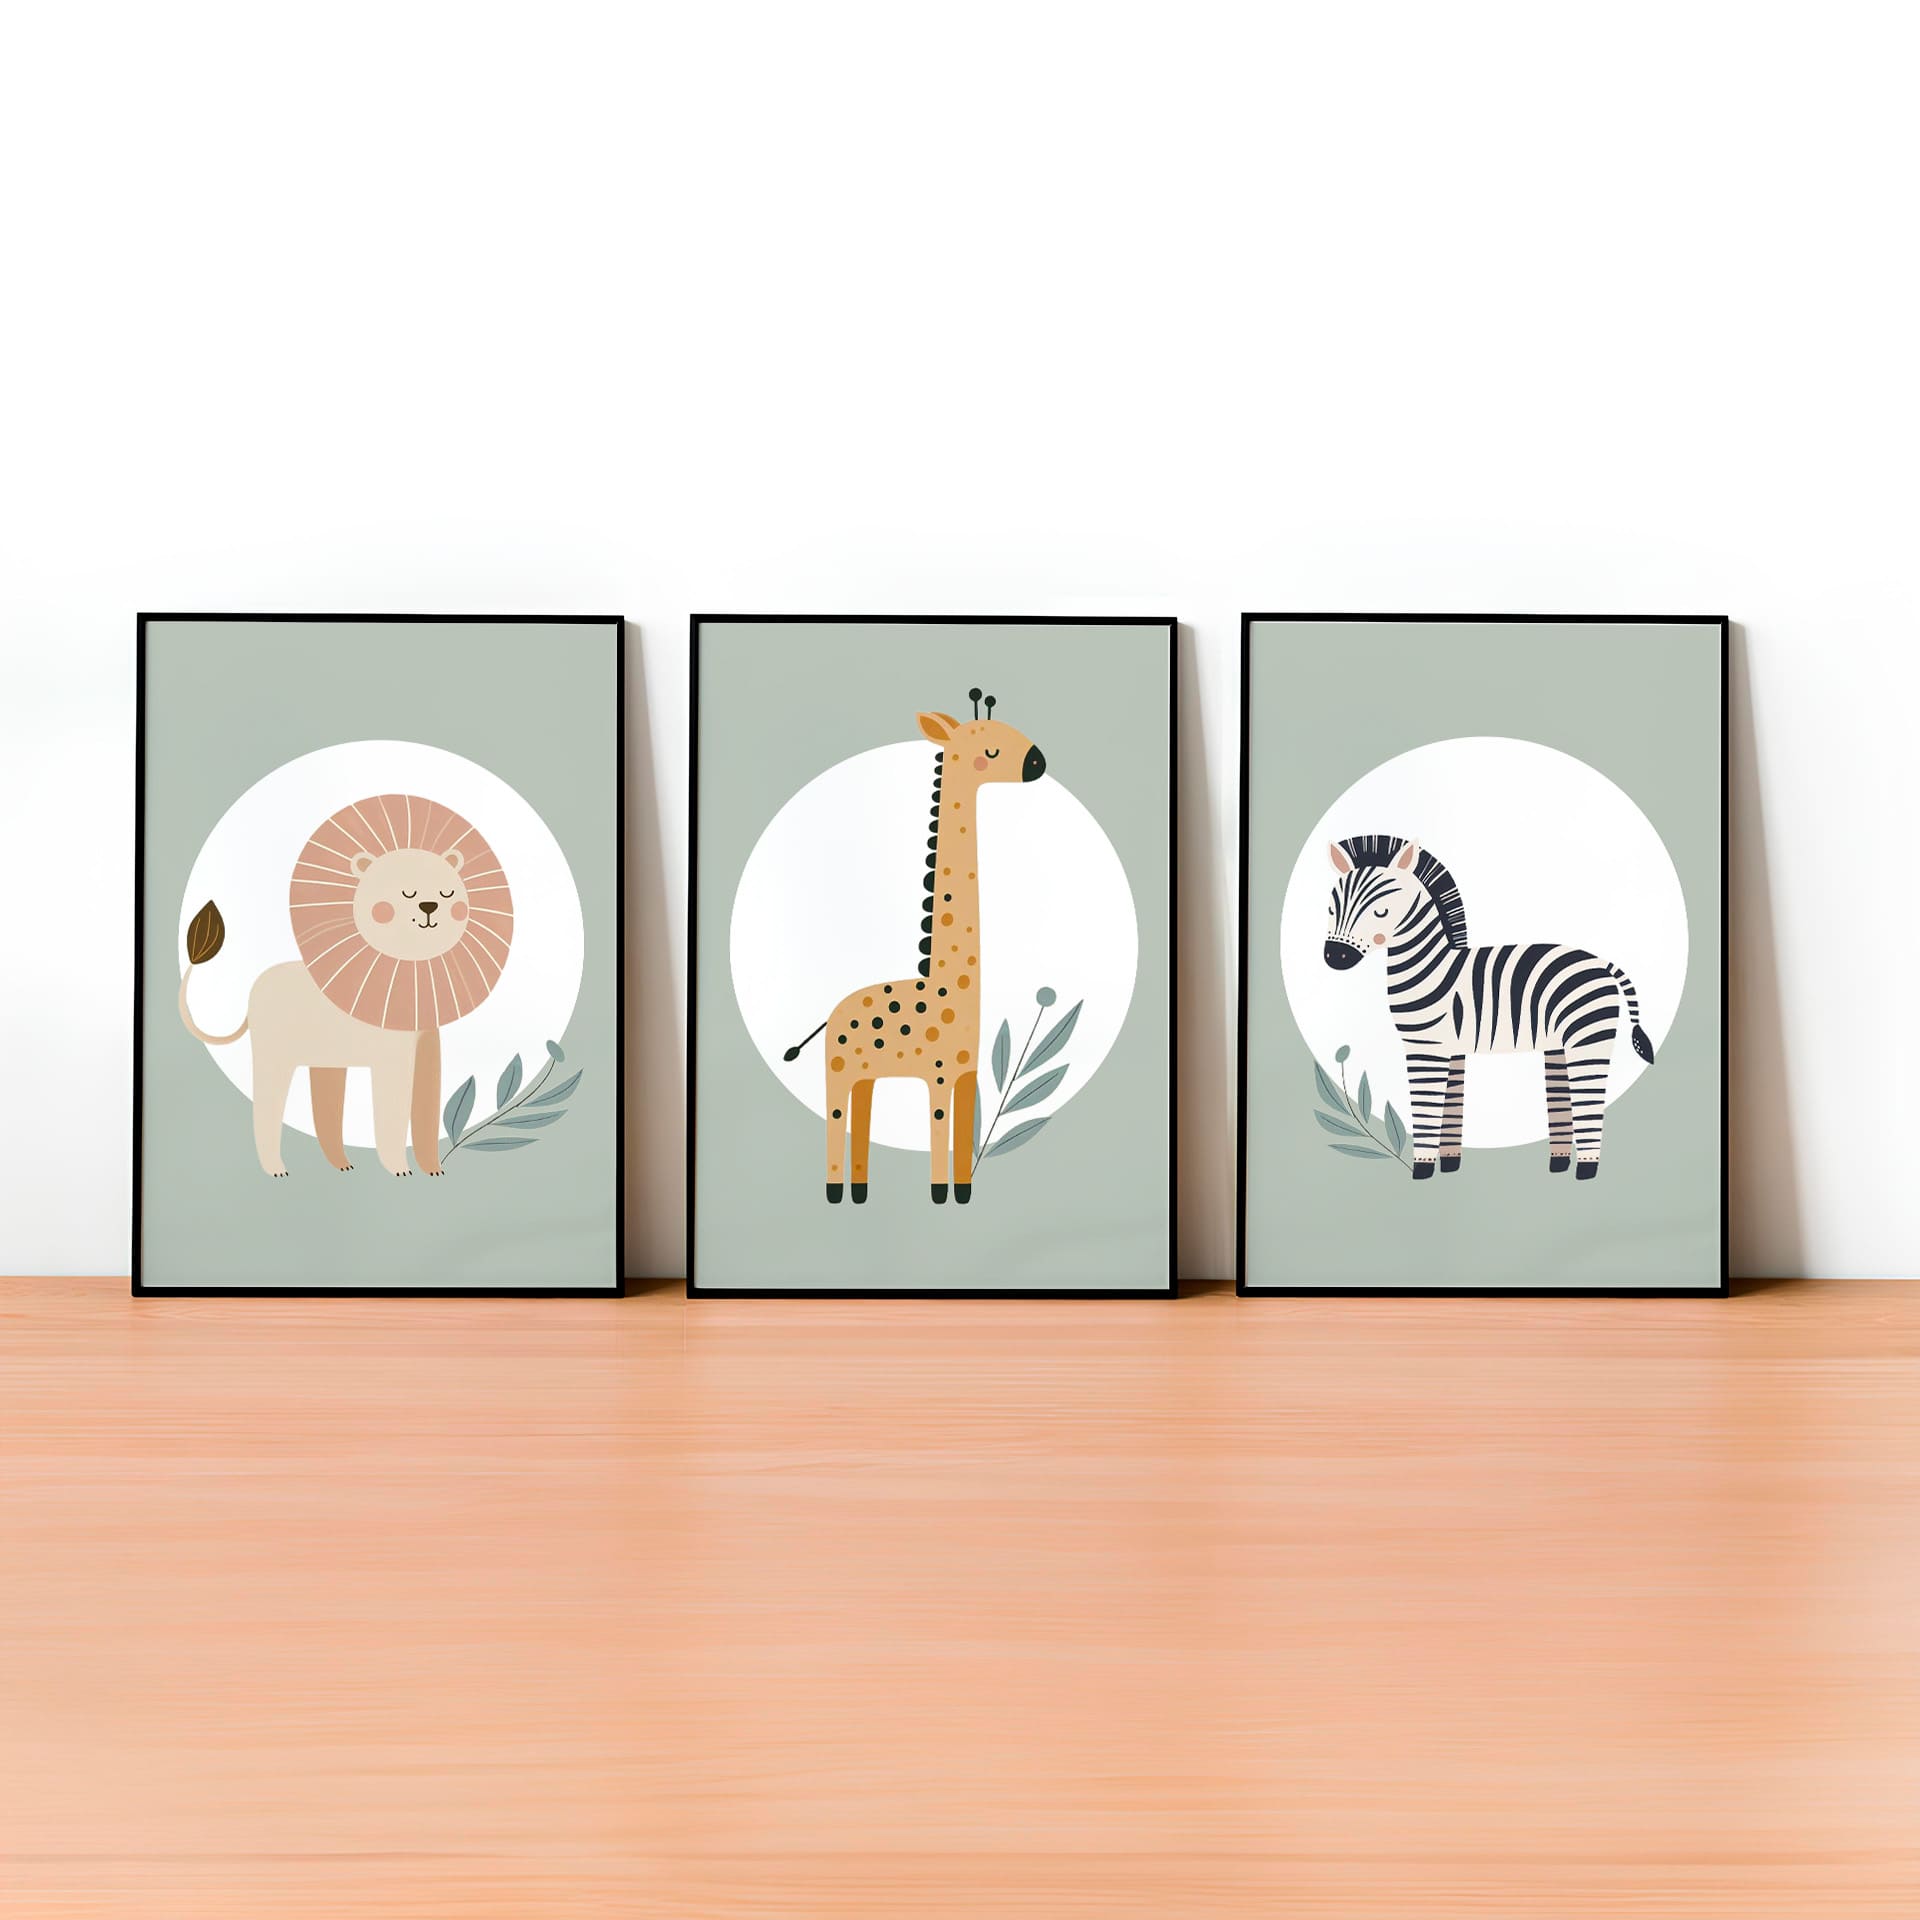 Set of three A4 prints featuring minimalist illustrations in muted tones. Each print depicts a different animal: a lion, a zebra, and a giraffe. The background is sage green with a white circle on which the animal is overlaid.